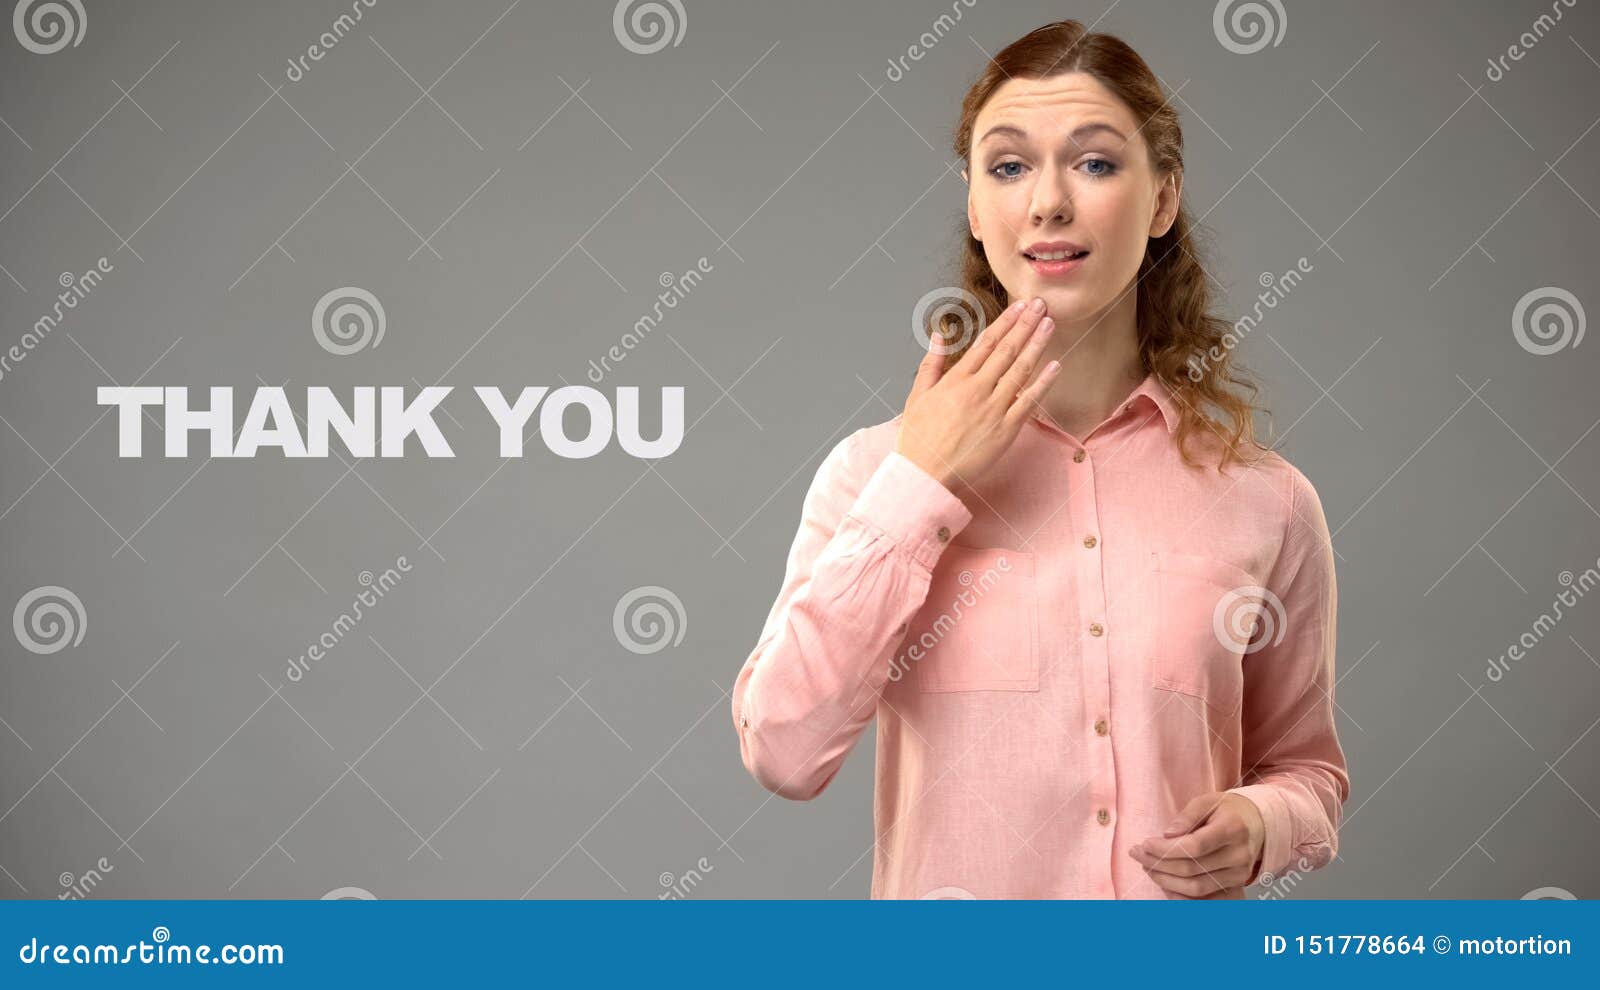 woman saying thank you in sign language, text on background, communication